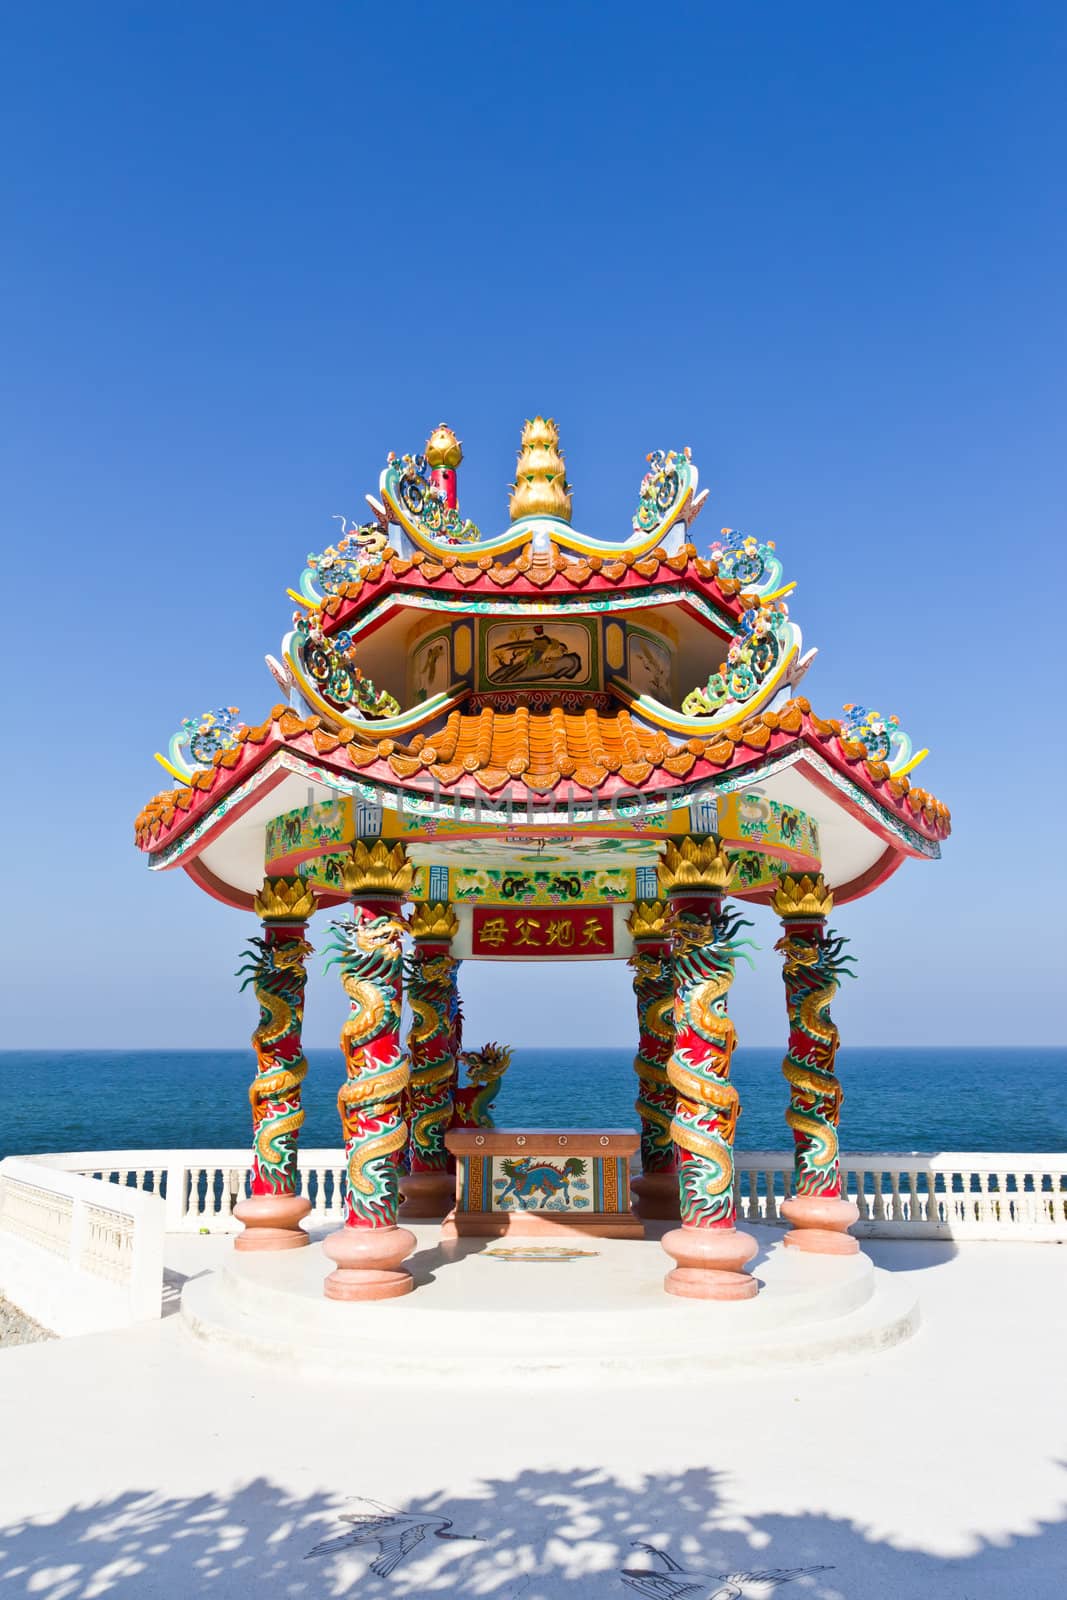 dragon pavilion against blue sky in chinese temple